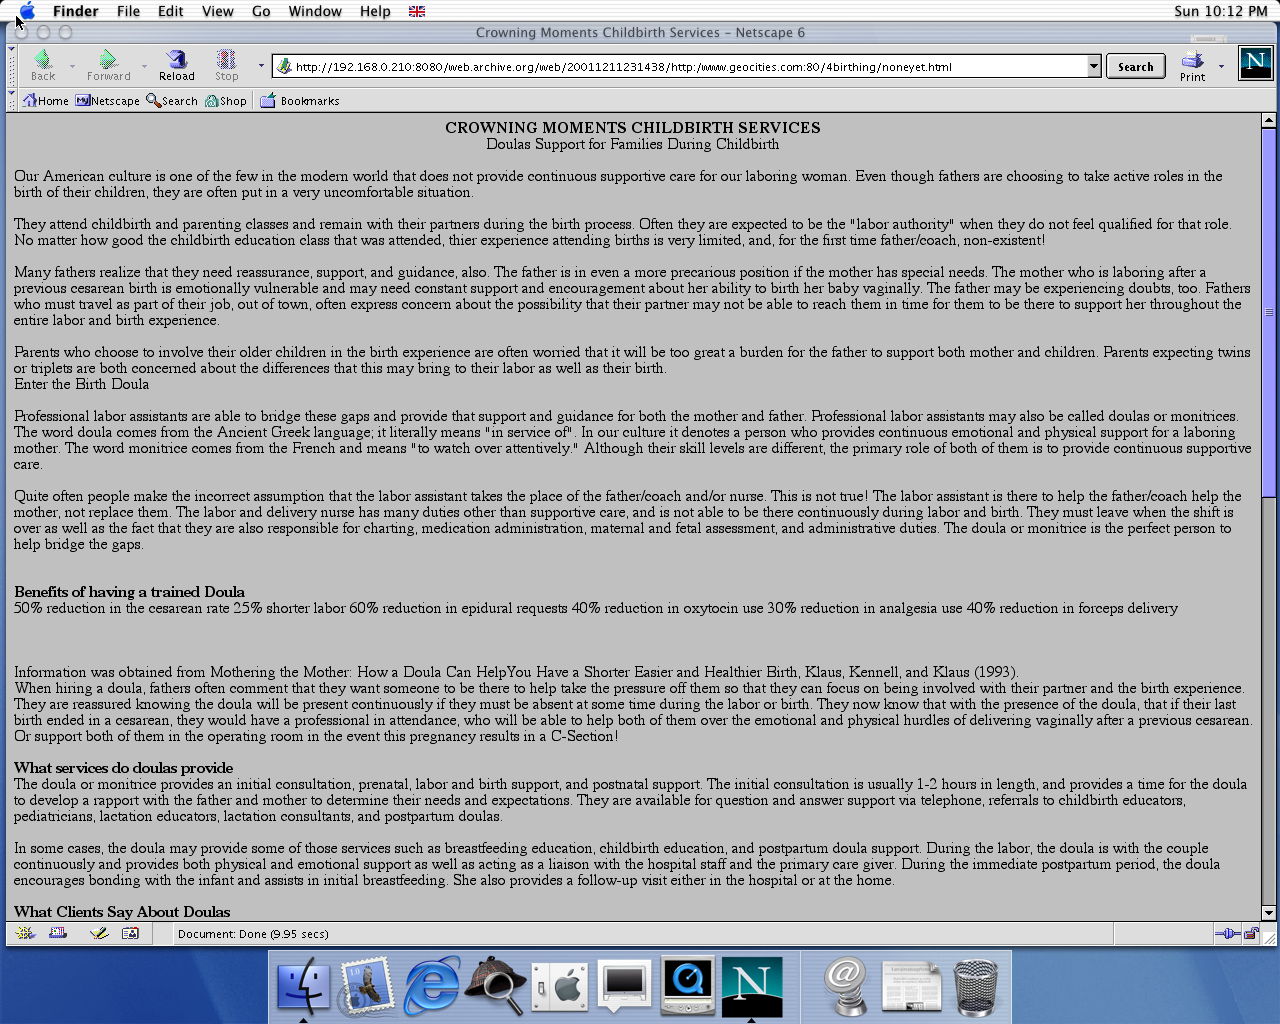 OS X 10.0 PPC with Netscape 6.1 displaying a page from GeoCities archived at December 11, 2001 at 23:14:38